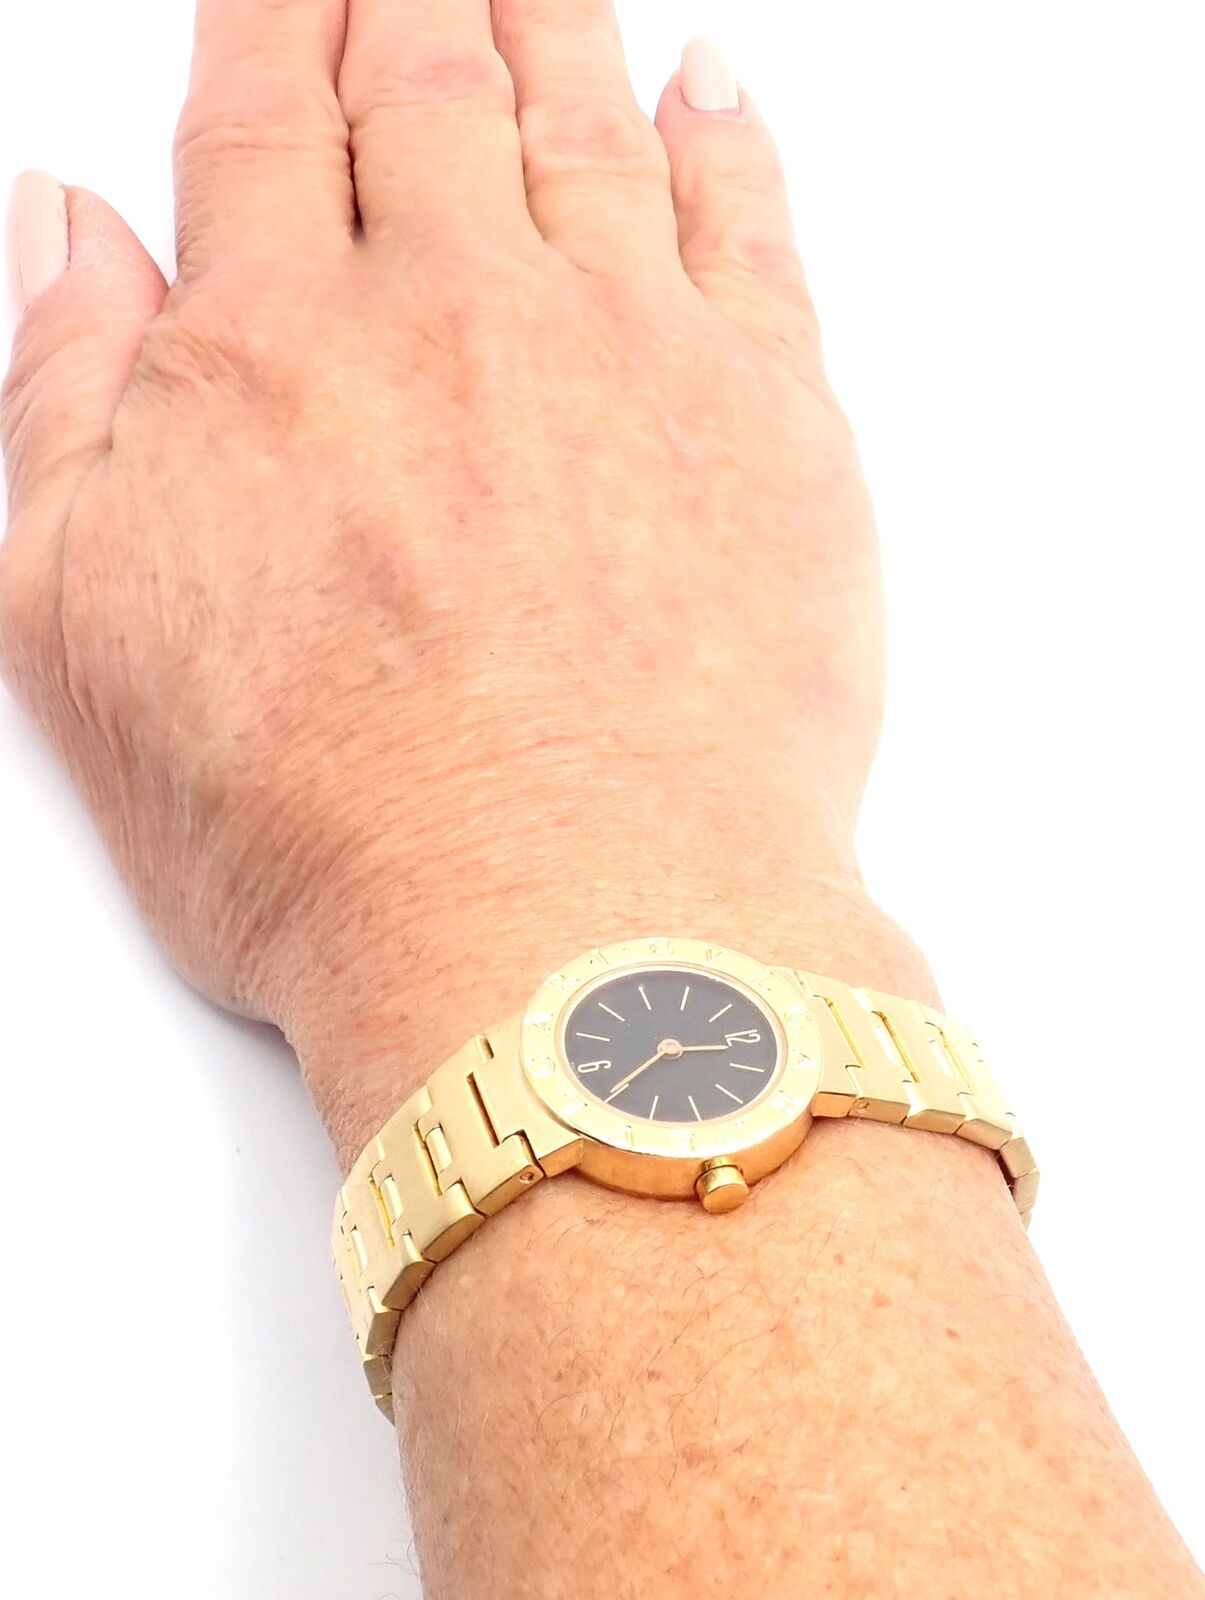 Bulgari Jewelry & Watches:Watches, Parts & Accessories:Watches:Wristwatches Authentic! Bulgari Bvlgari 18k Yellow Solid Gold Diagono Bracelet Watch BB23GG